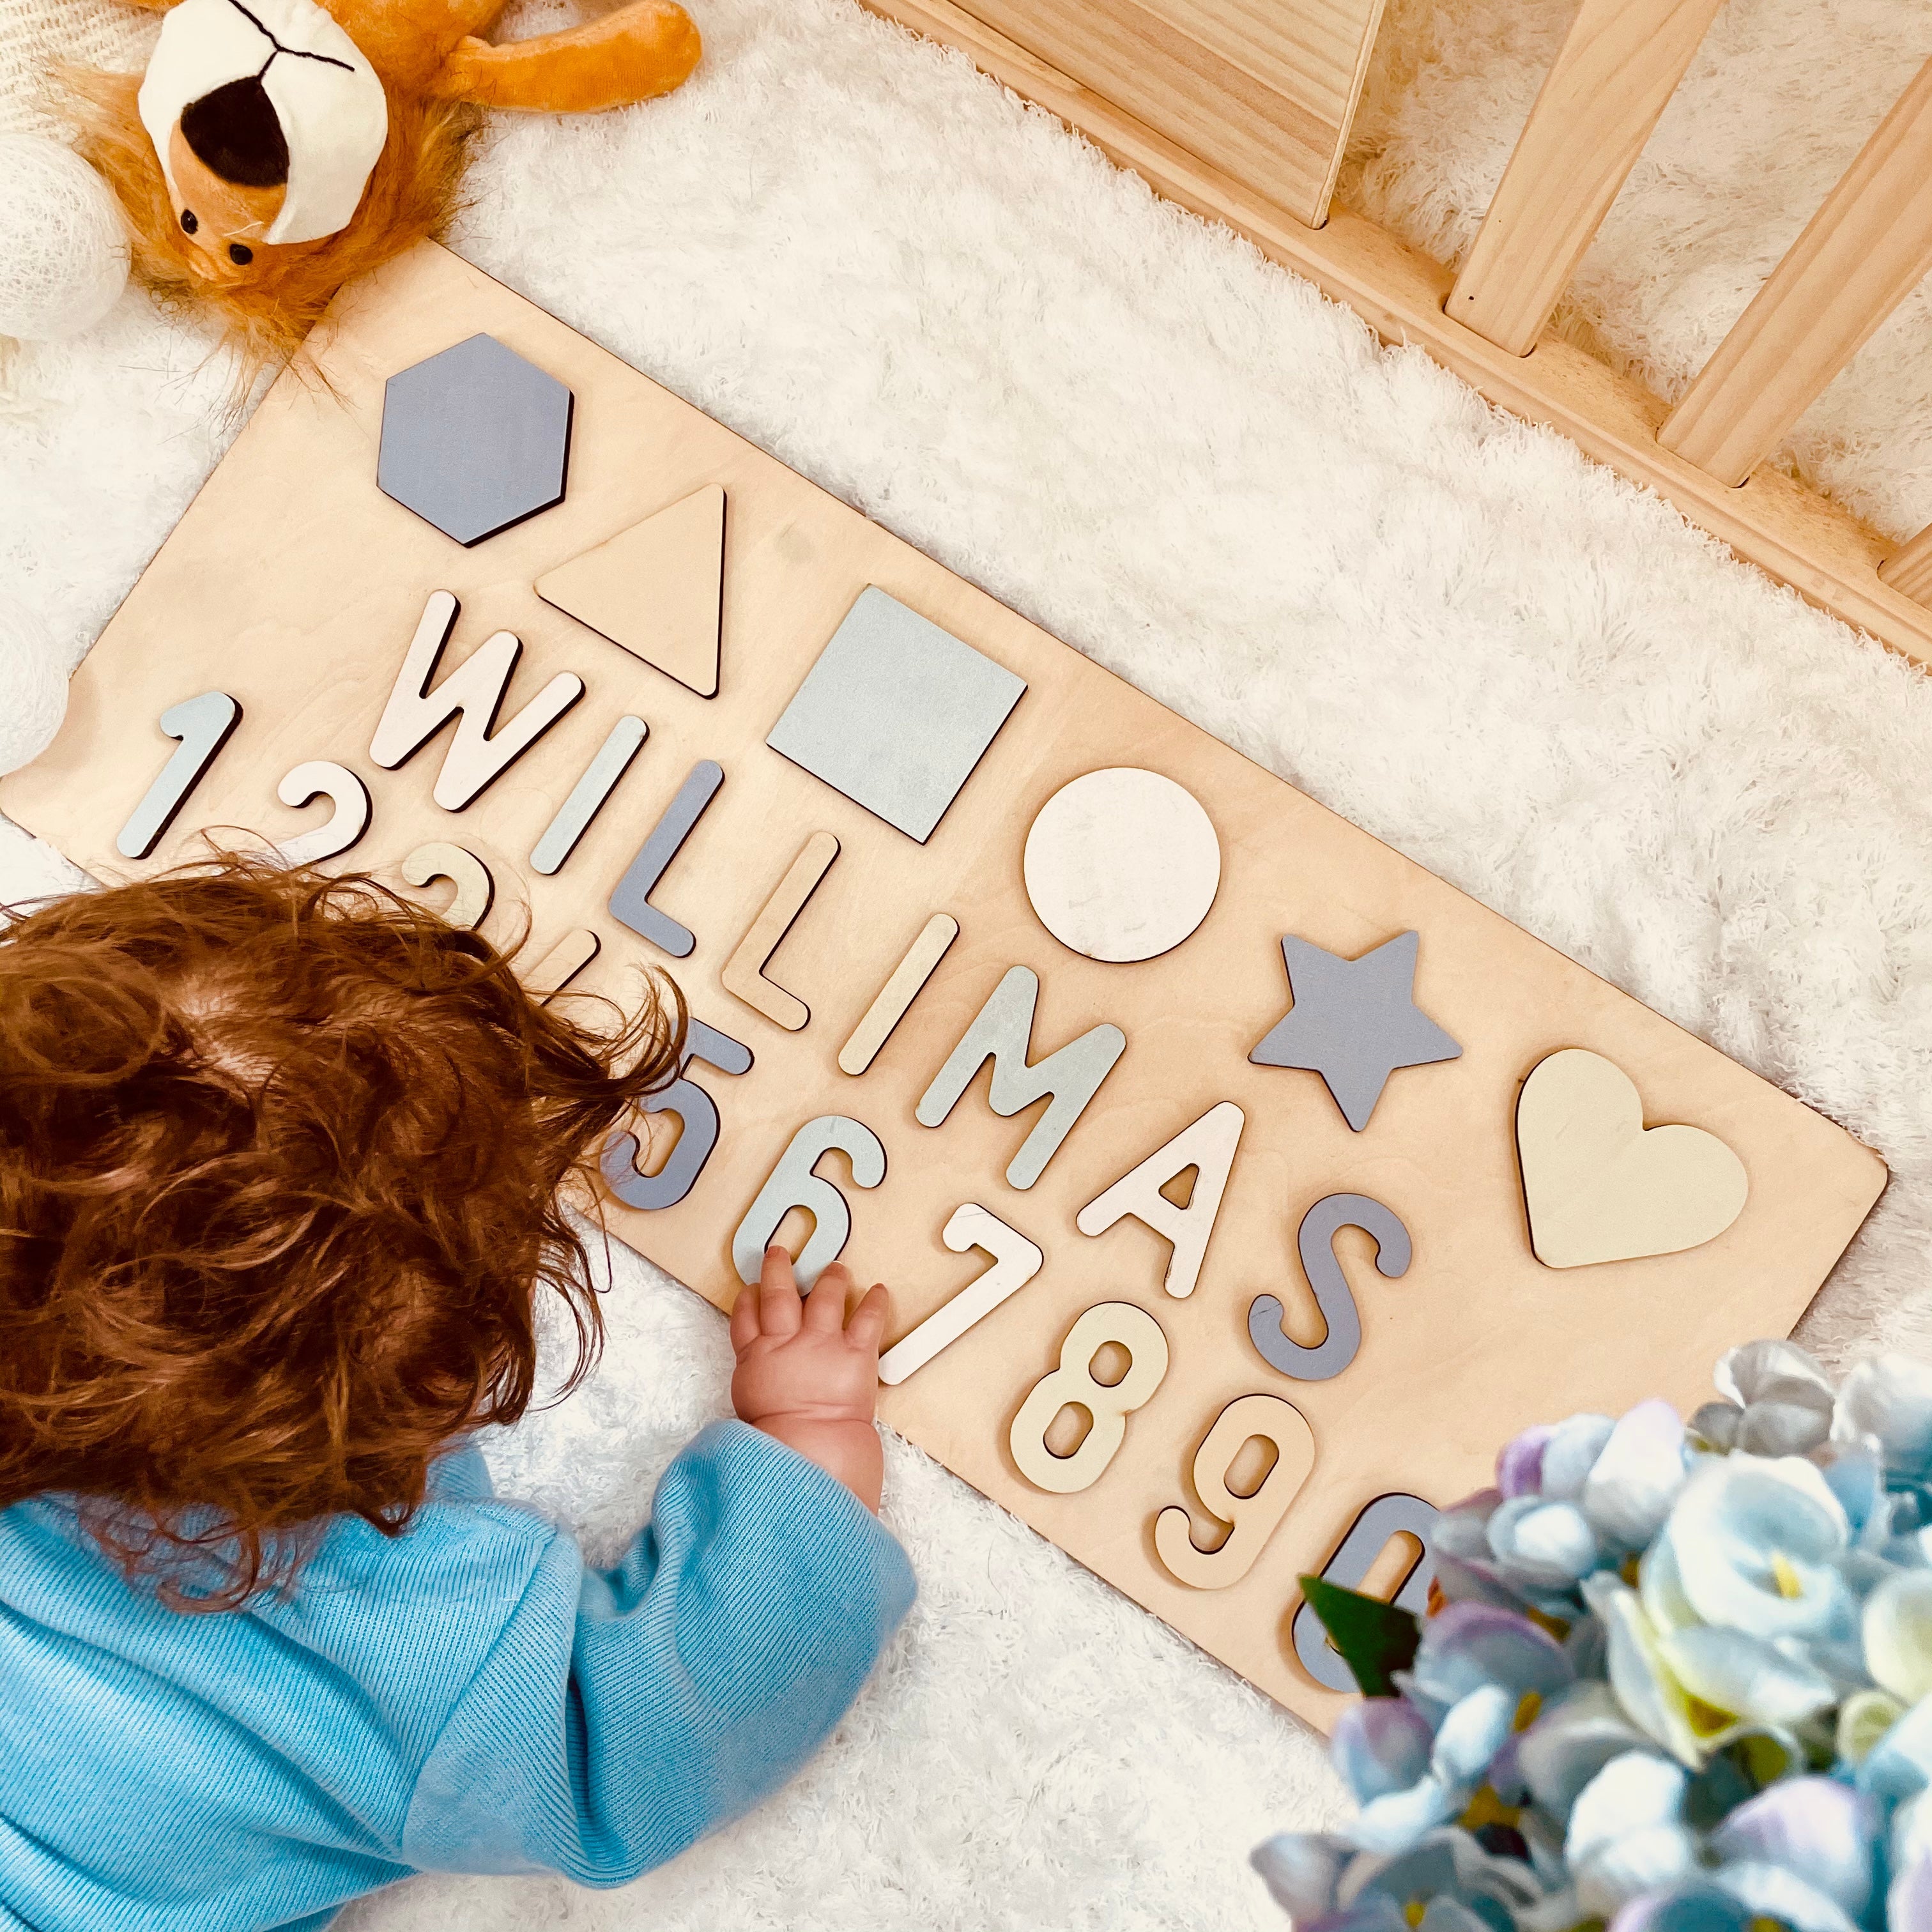 Personalized Numbers And Shapes Wooden Name Puzzle Our bestselling Name Puzzle with your choice of icon graphic! Choose from different whimsical characters and you will certainly find one to bring a smile to your child’s face! Our handcrafted, Icon Name P